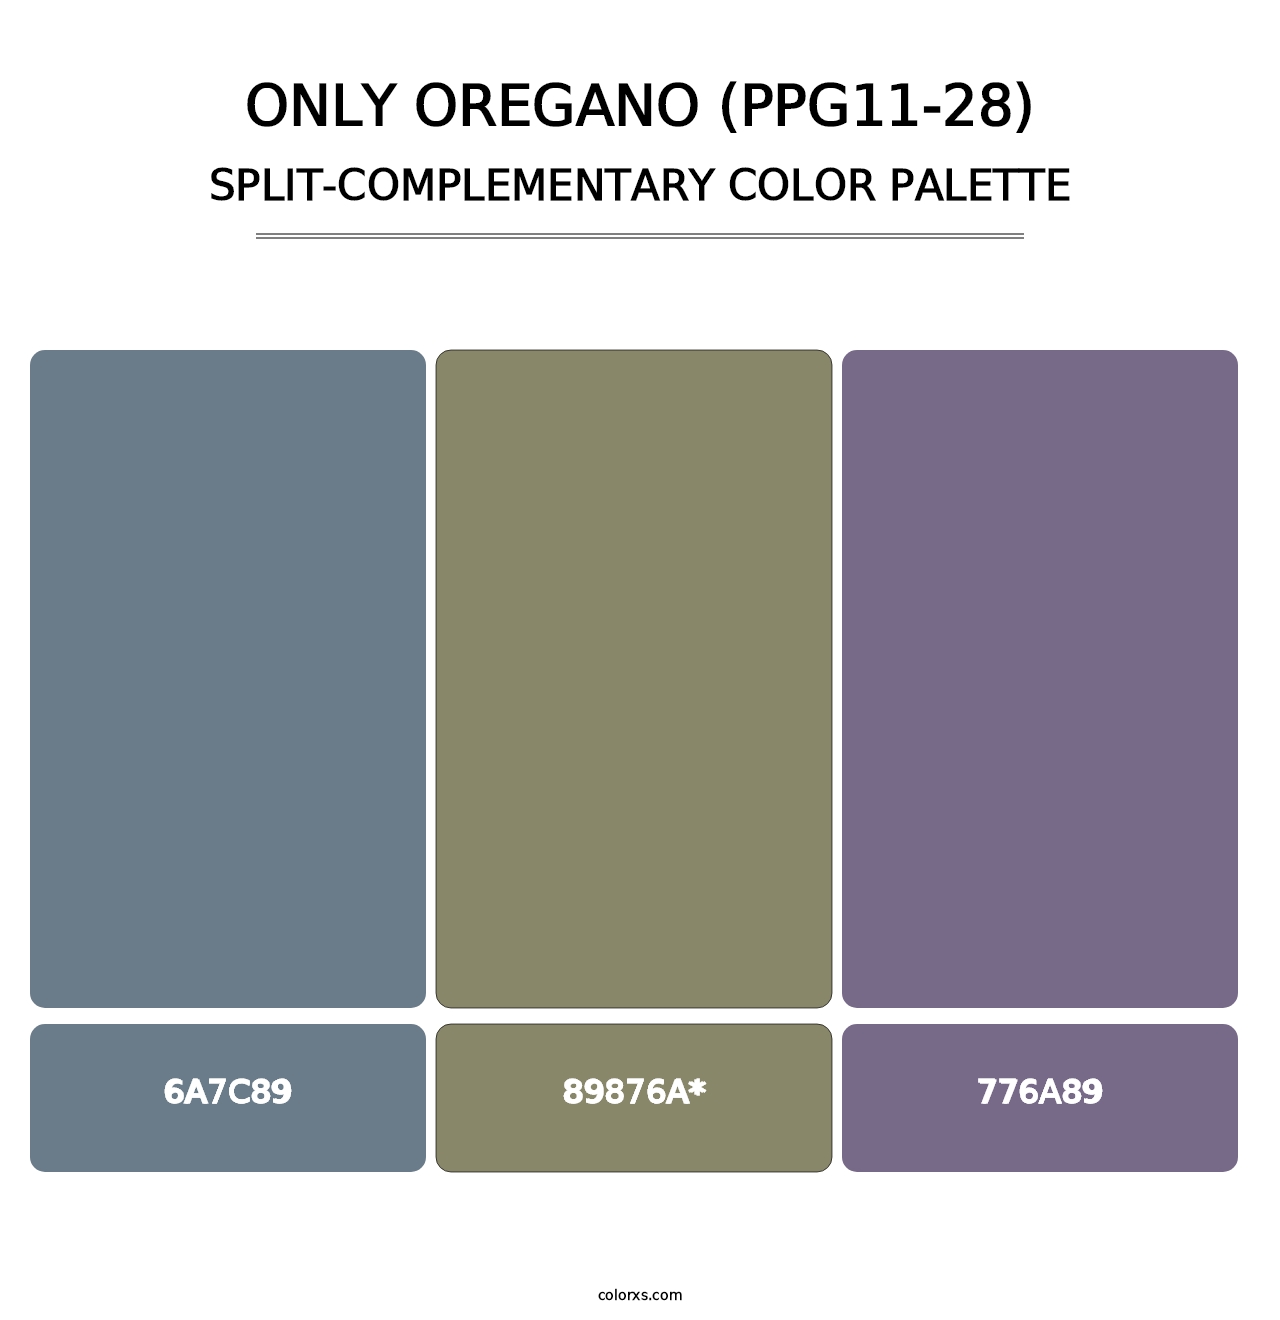 Only Oregano (PPG11-28) - Split-Complementary Color Palette